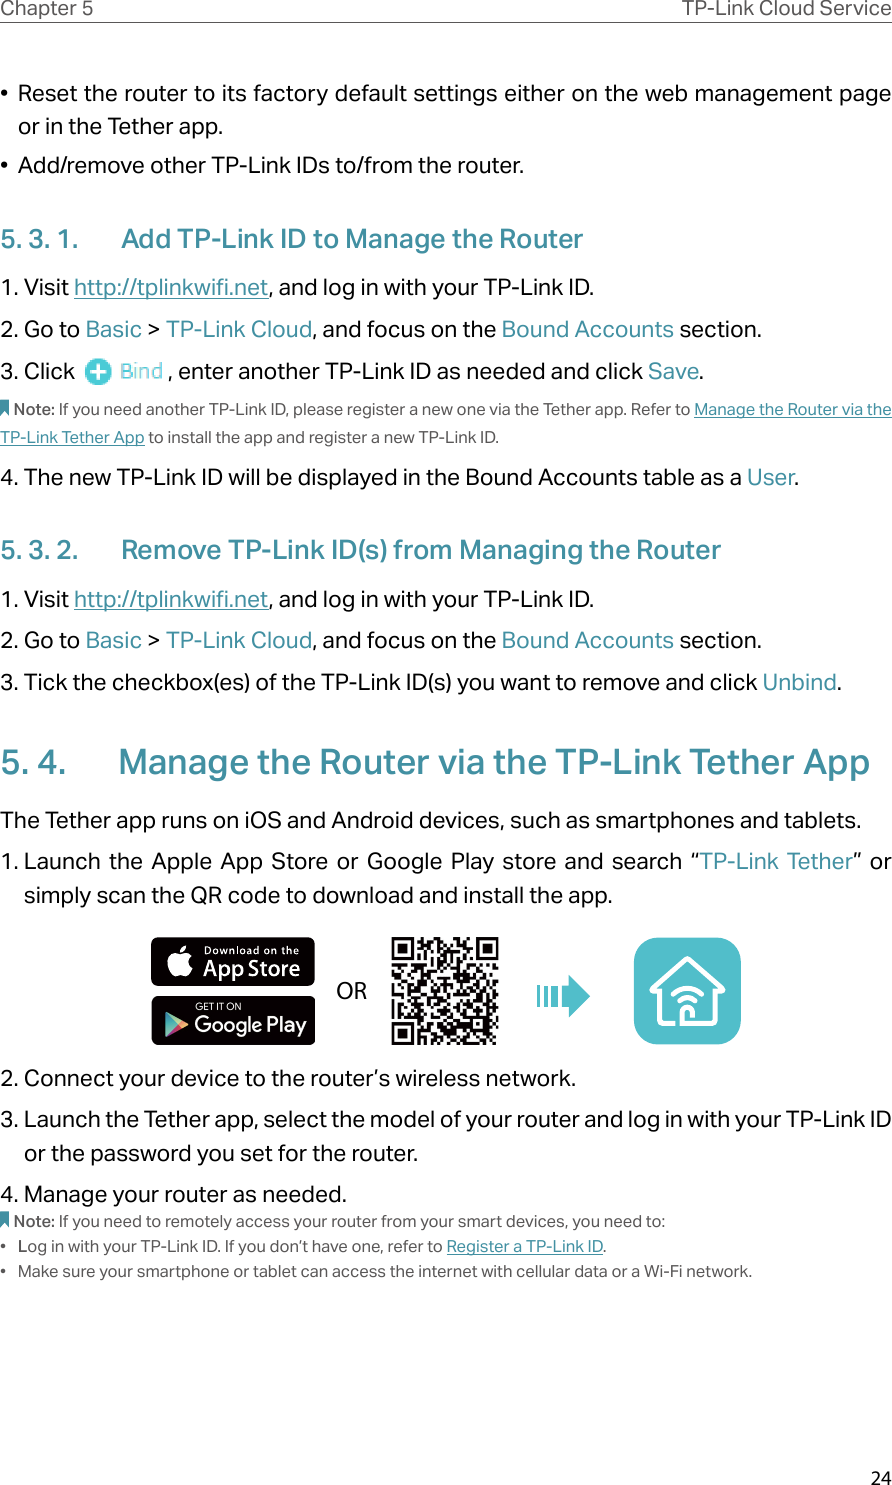 24Chapter 5 TP-Link Cloud Service•  Reset the router to its factory default settings either on the web management page or in the Tether app.•  Add/remove other TP-Link IDs to/from the router.5. 3. 1.  Add TP-Link ID to Manage the Router1. Visit http://tplinkwifi.net, and log in with your TP-Link ID.2. Go to Basic &gt; TP-Link Cloud, and focus on the Bound Accounts section.3. Click  , enter another TP-Link ID as needed and click Save.Note: If you need another TP-Link ID, please register a new one via the Tether app. Refer to Manage the Router via the TP-Link Tether App to install the app and register a new TP-Link ID.4. The new TP-Link ID will be displayed in the Bound Accounts table as a User.5. 3. 2.  Remove TP-Link ID(s) from Managing the Router1. Visit http://tplinkwifi.net, and log in with your TP-Link ID.2. Go to Basic &gt; TP-Link Cloud, and focus on the Bound Accounts section.3. Tick the checkbox(es) of the TP-Link ID(s) you want to remove and click Unbind. 5. 4.  Manage the Router via the TP-Link Tether AppThe Tether app runs on iOS and Android devices, such as smartphones and tablets.1. Launch the Apple App Store or Google Play store and search “TP-Link Tether”  or  simply scan the QR code to download and install the app.OR2. Connect your device to the router’s wireless network.3. Launch the Tether app, select the model of your router and log in with your TP-Link ID or the password you set for the router. 4. Manage your router as needed.Note: If you need to remotely access your router from your smart devices, you need to:•  Log in with your TP-Link ID. If you don’t have one, refer to Register a TP-Link ID.•  Make sure your smartphone or tablet can access the internet with cellular data or a Wi-Fi network.